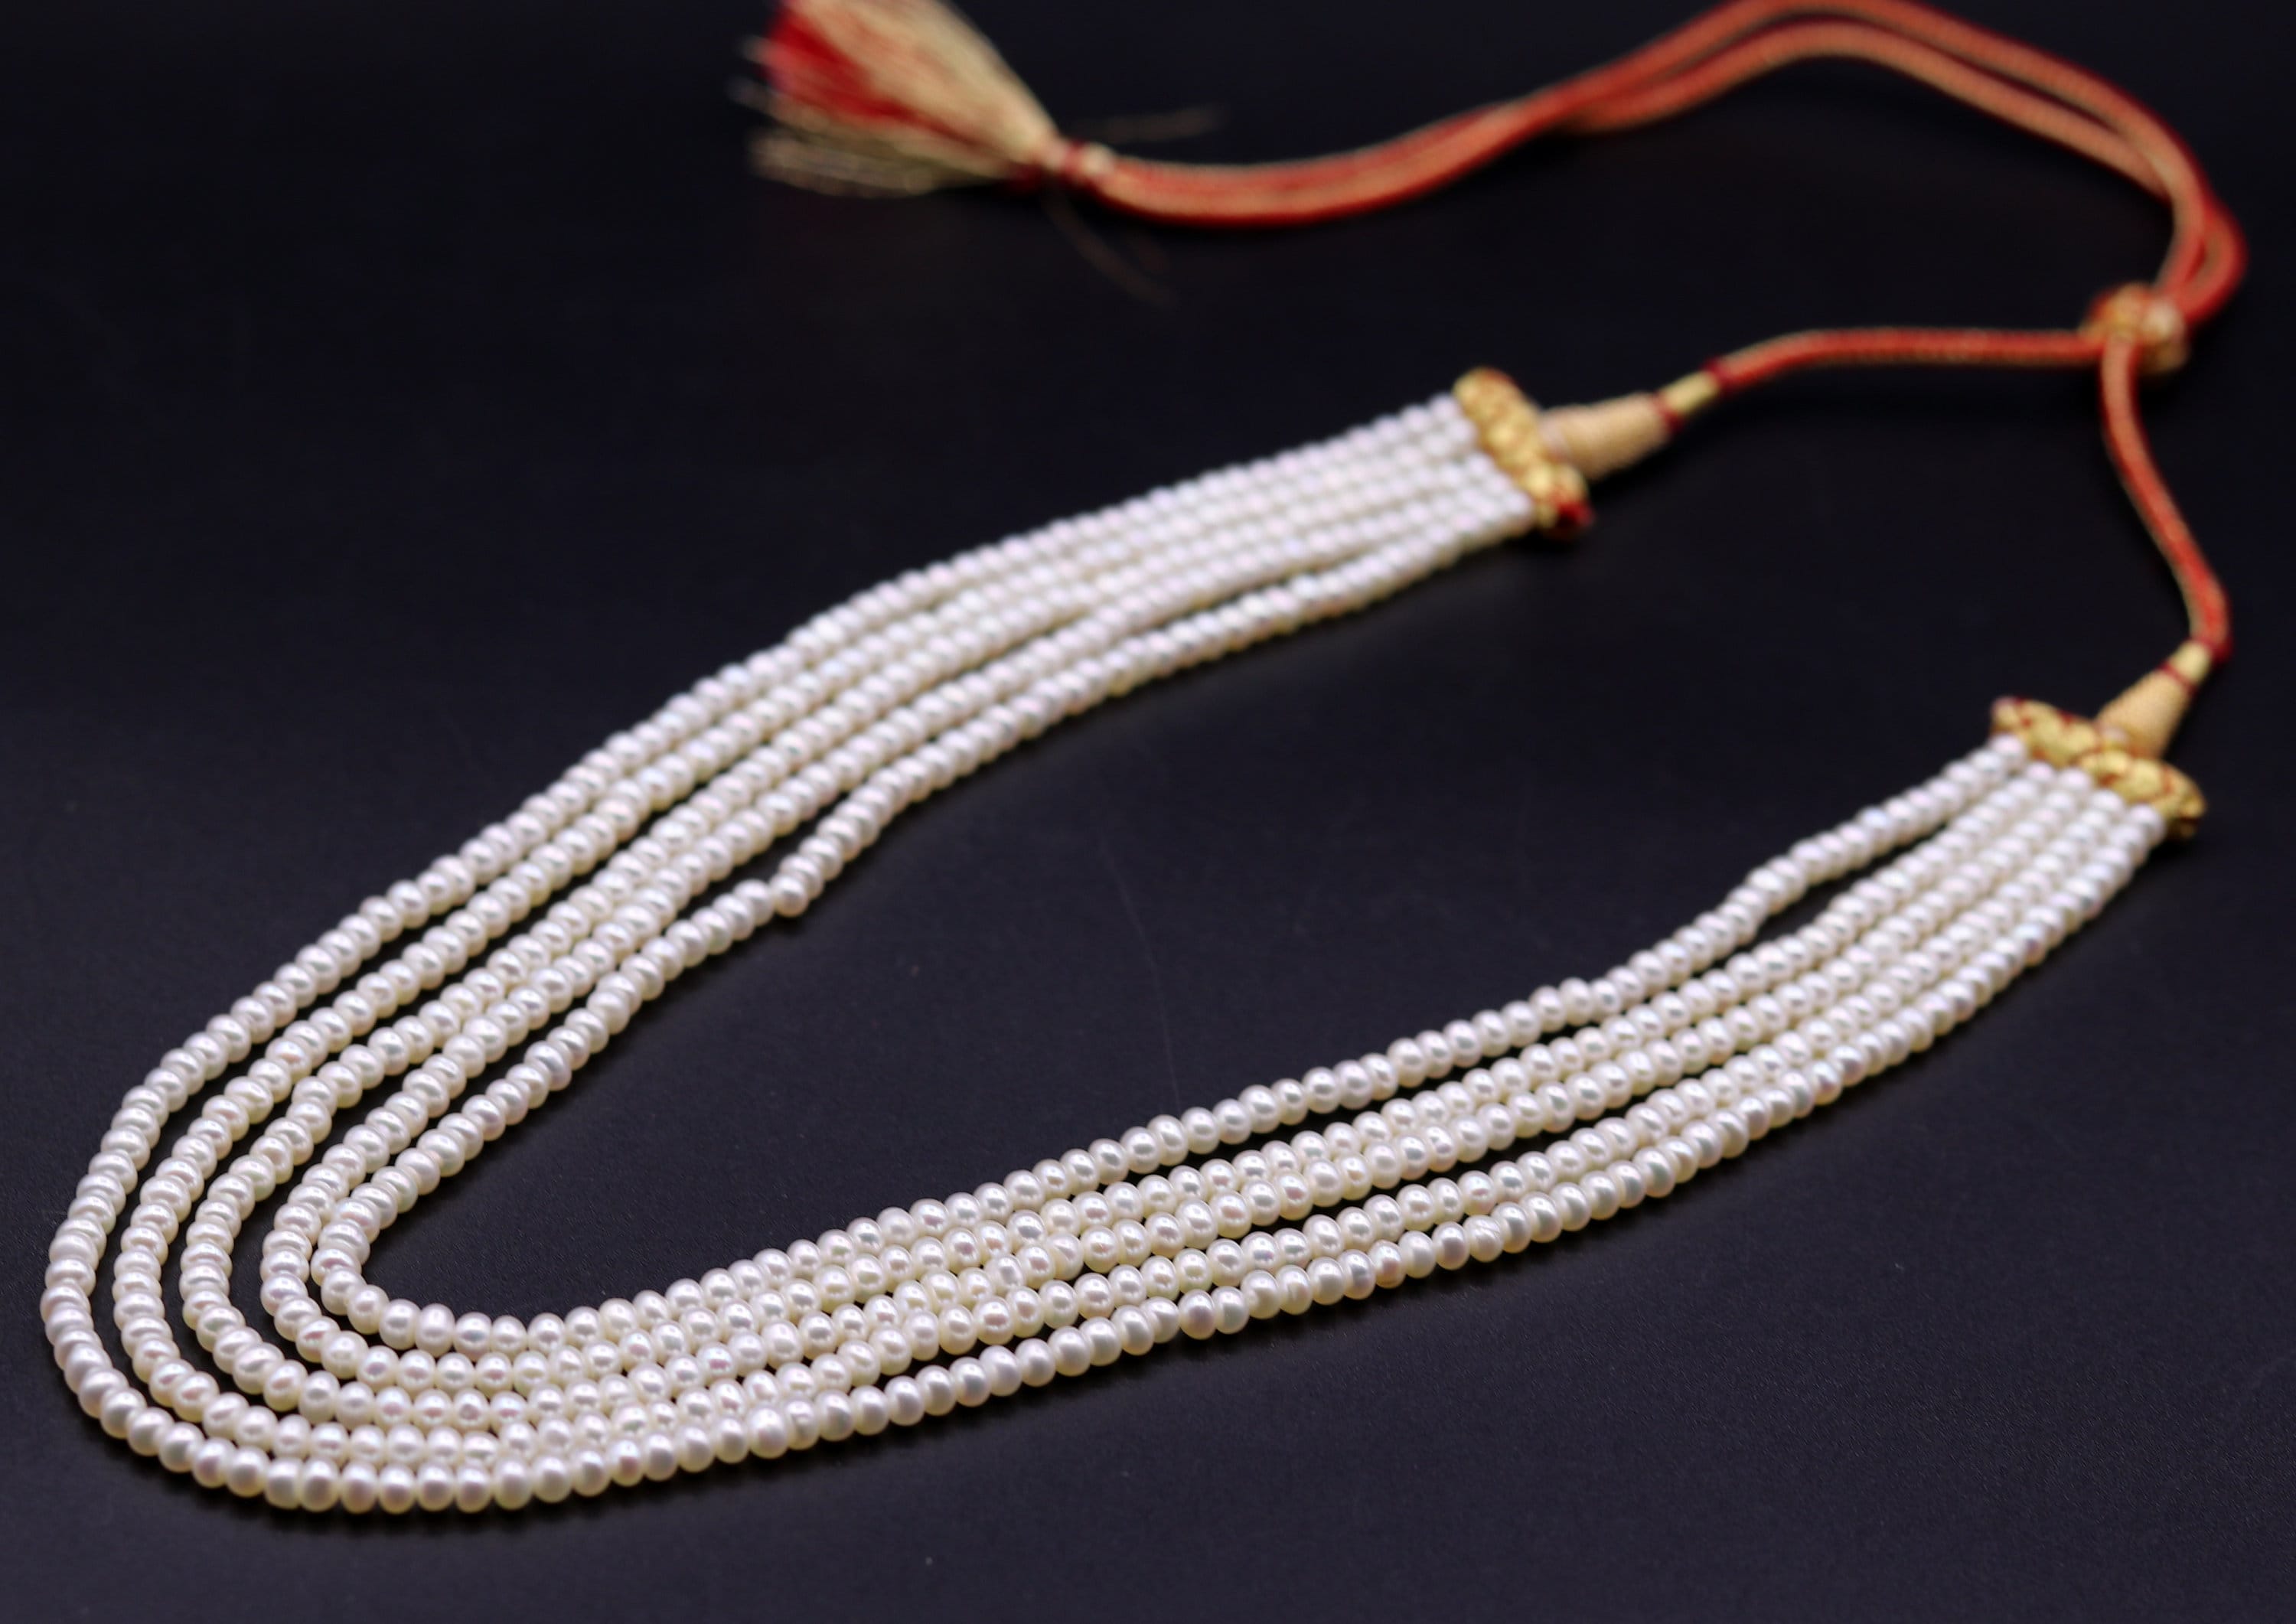 Freshwater 4-4.5mm Pearls String, Necklace Clasp as Free Gift